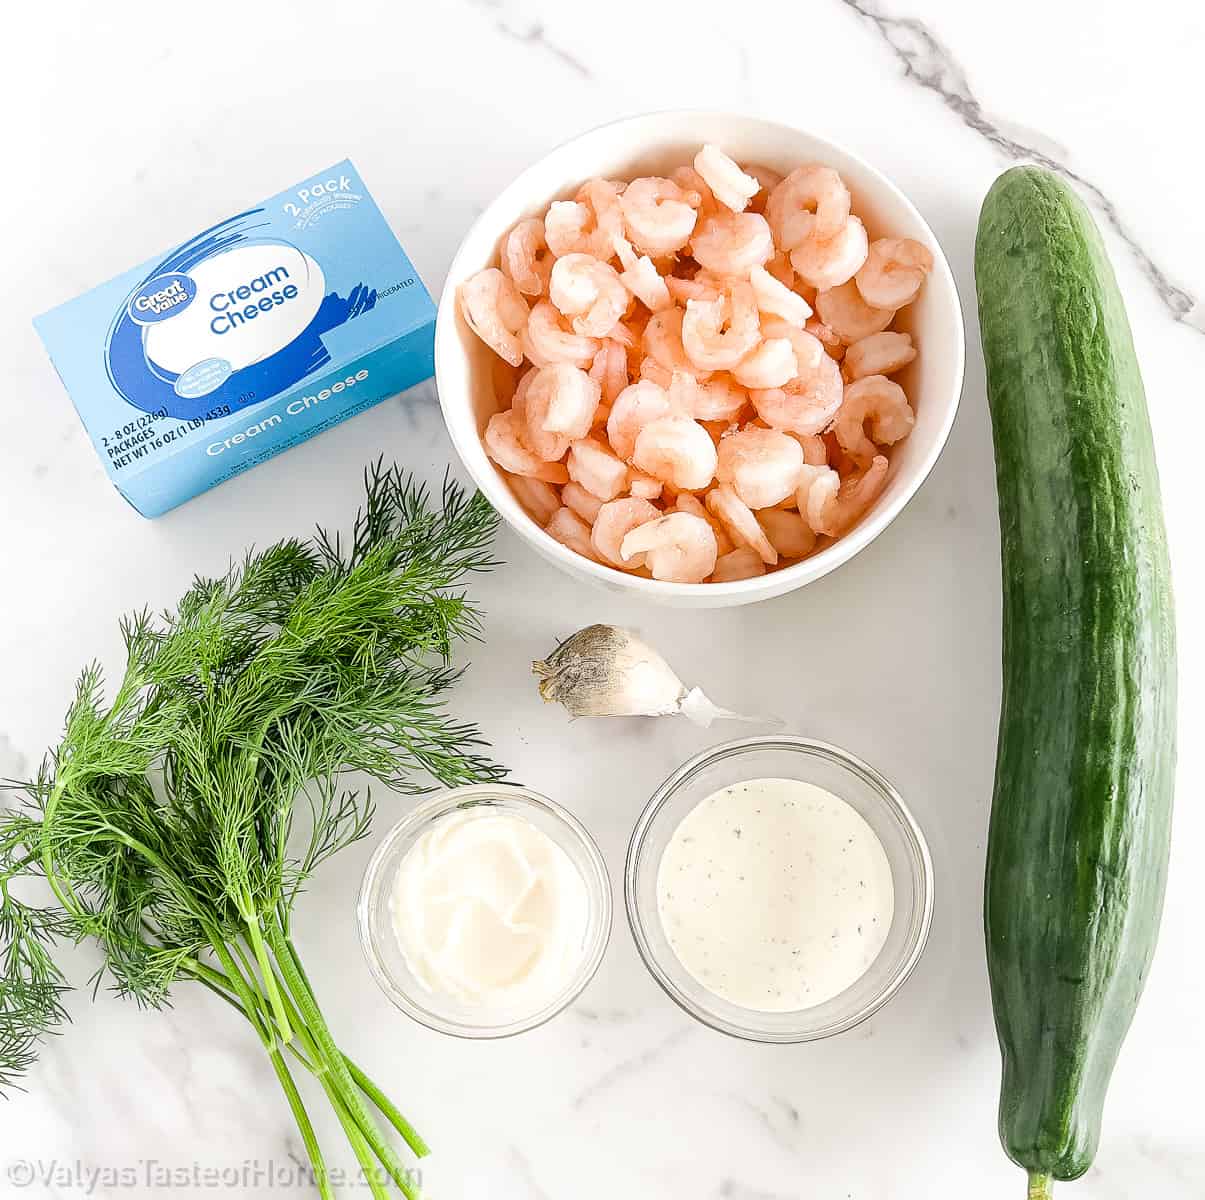 All you need are some simple pantry staple ingredients to make this cucumber shrimp appetizer recipe at home.